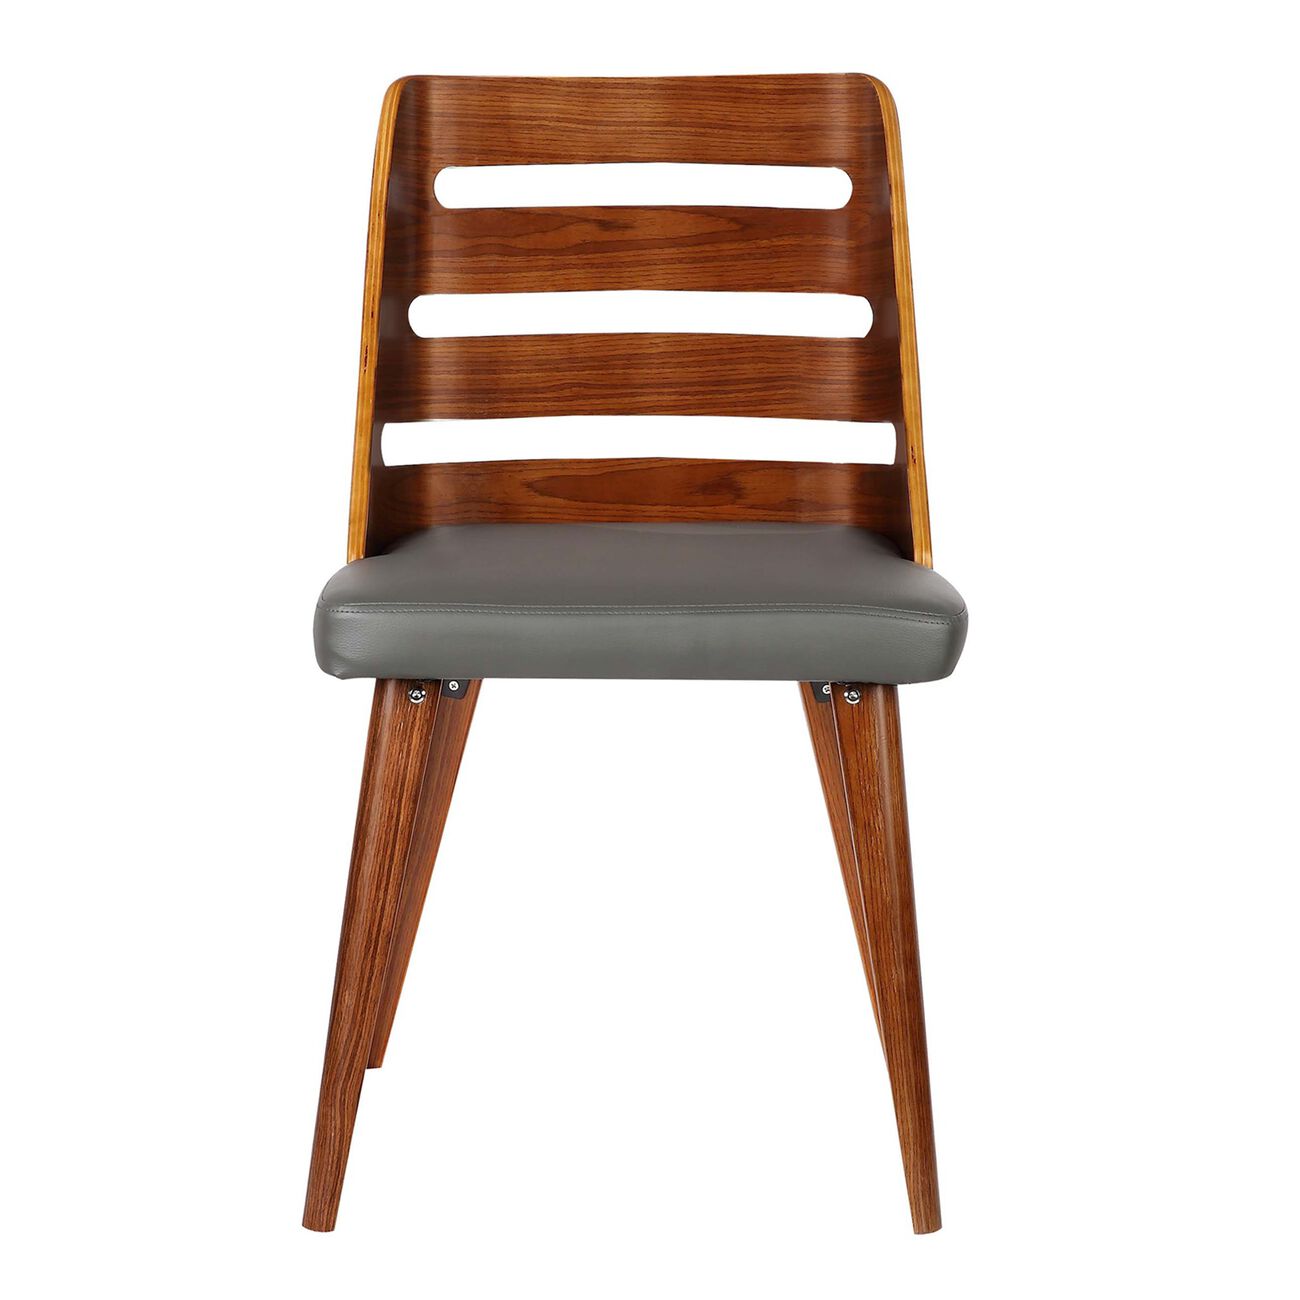 Leatherette Seat Dining Chair with Curved Ladder Backrest, Brown and Gray